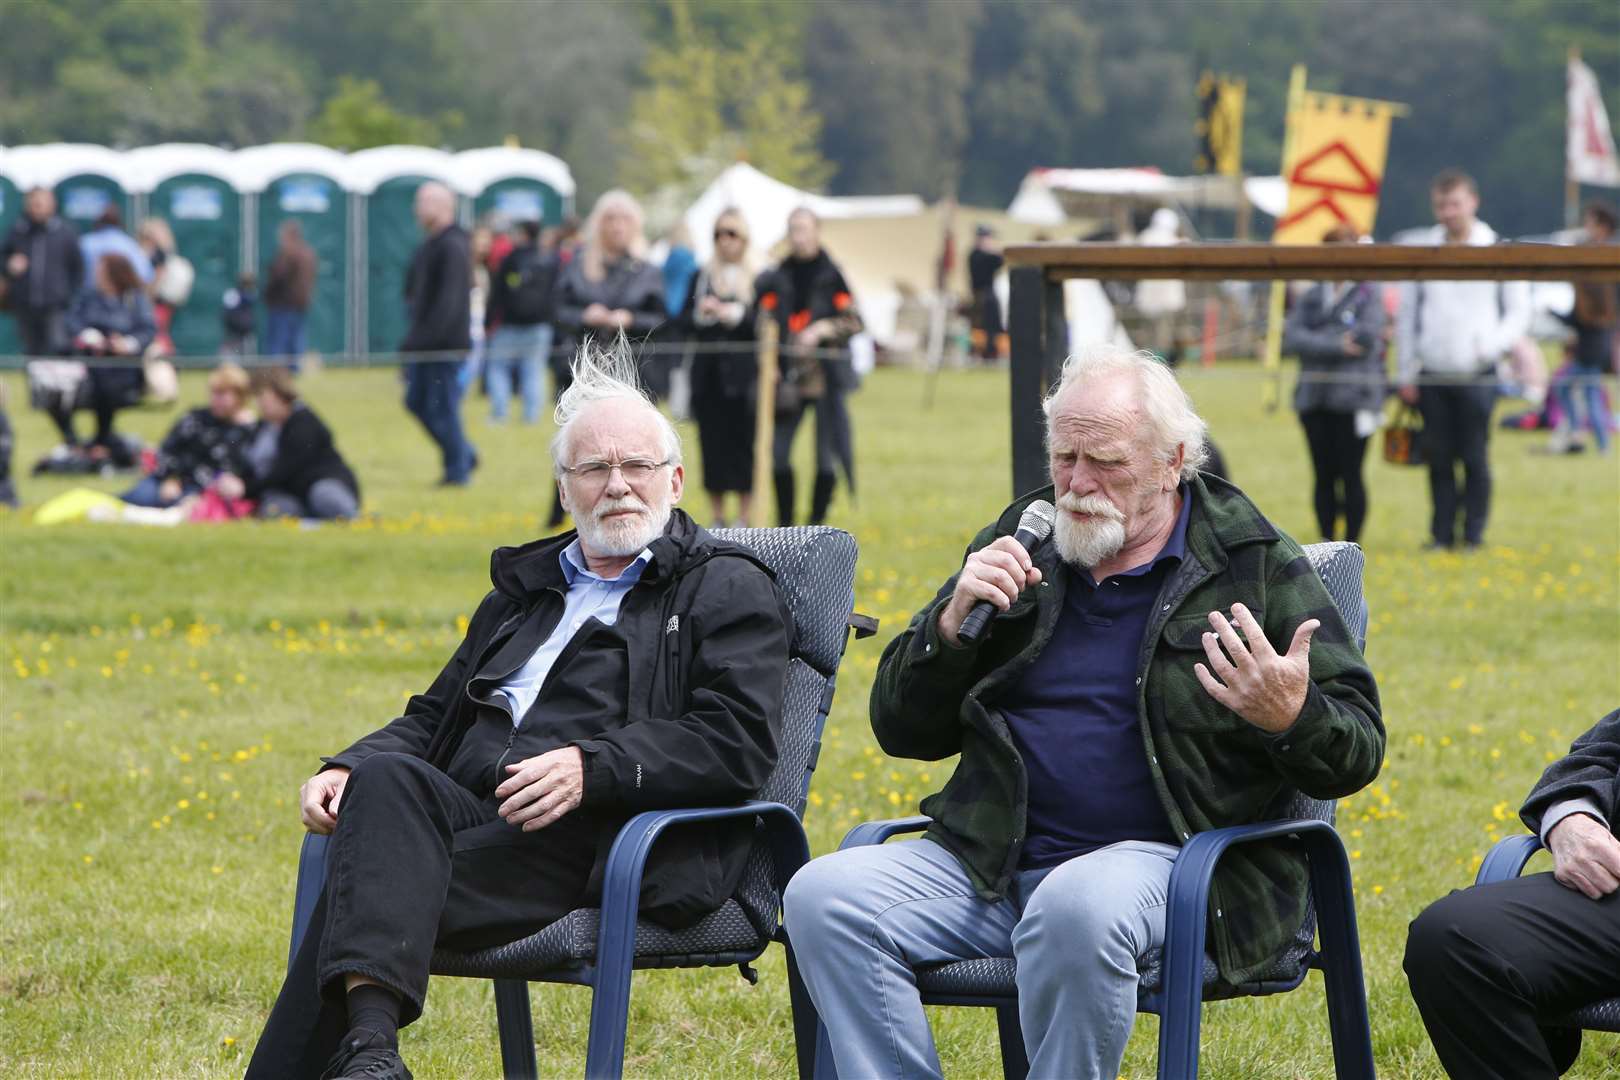 Cast from the show including Ian McElhinney and James Cosmo featured at Thronefest in Quex Park